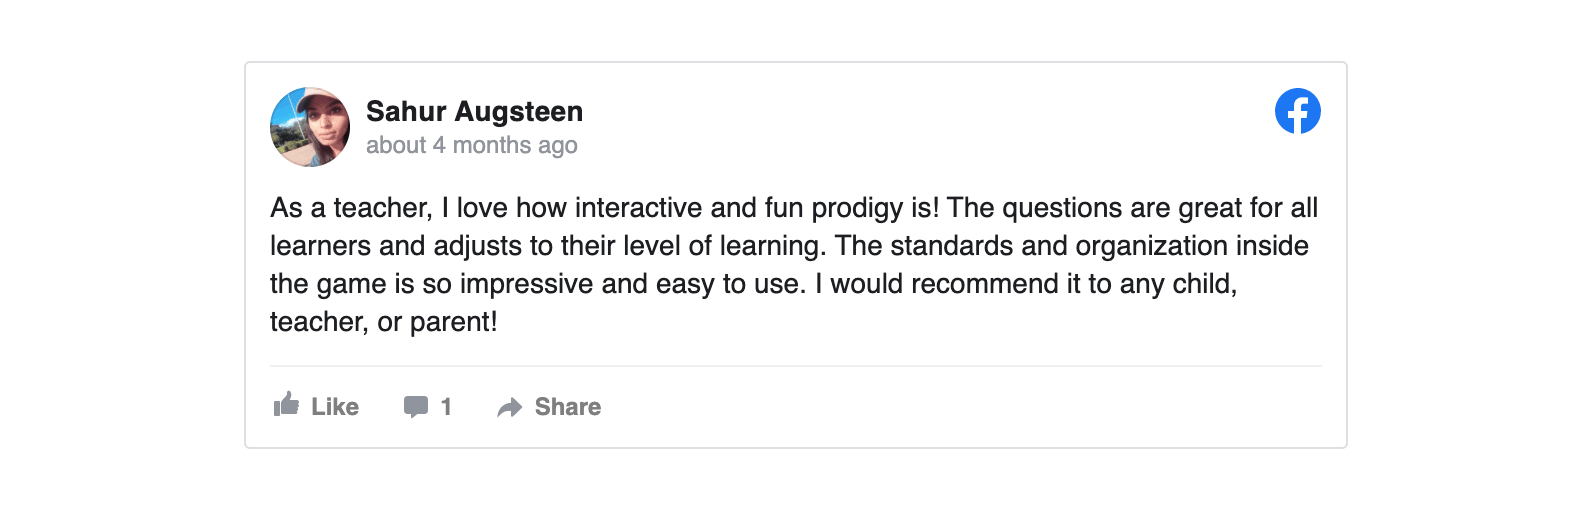 As a teacher, I love how interactive and fun Prodigy is! The questions are great for all learners and adjusts to their level of learning. The standards and organization inside the game is so impressive and easy to use. I would recommend it to any child, teacher or parent.